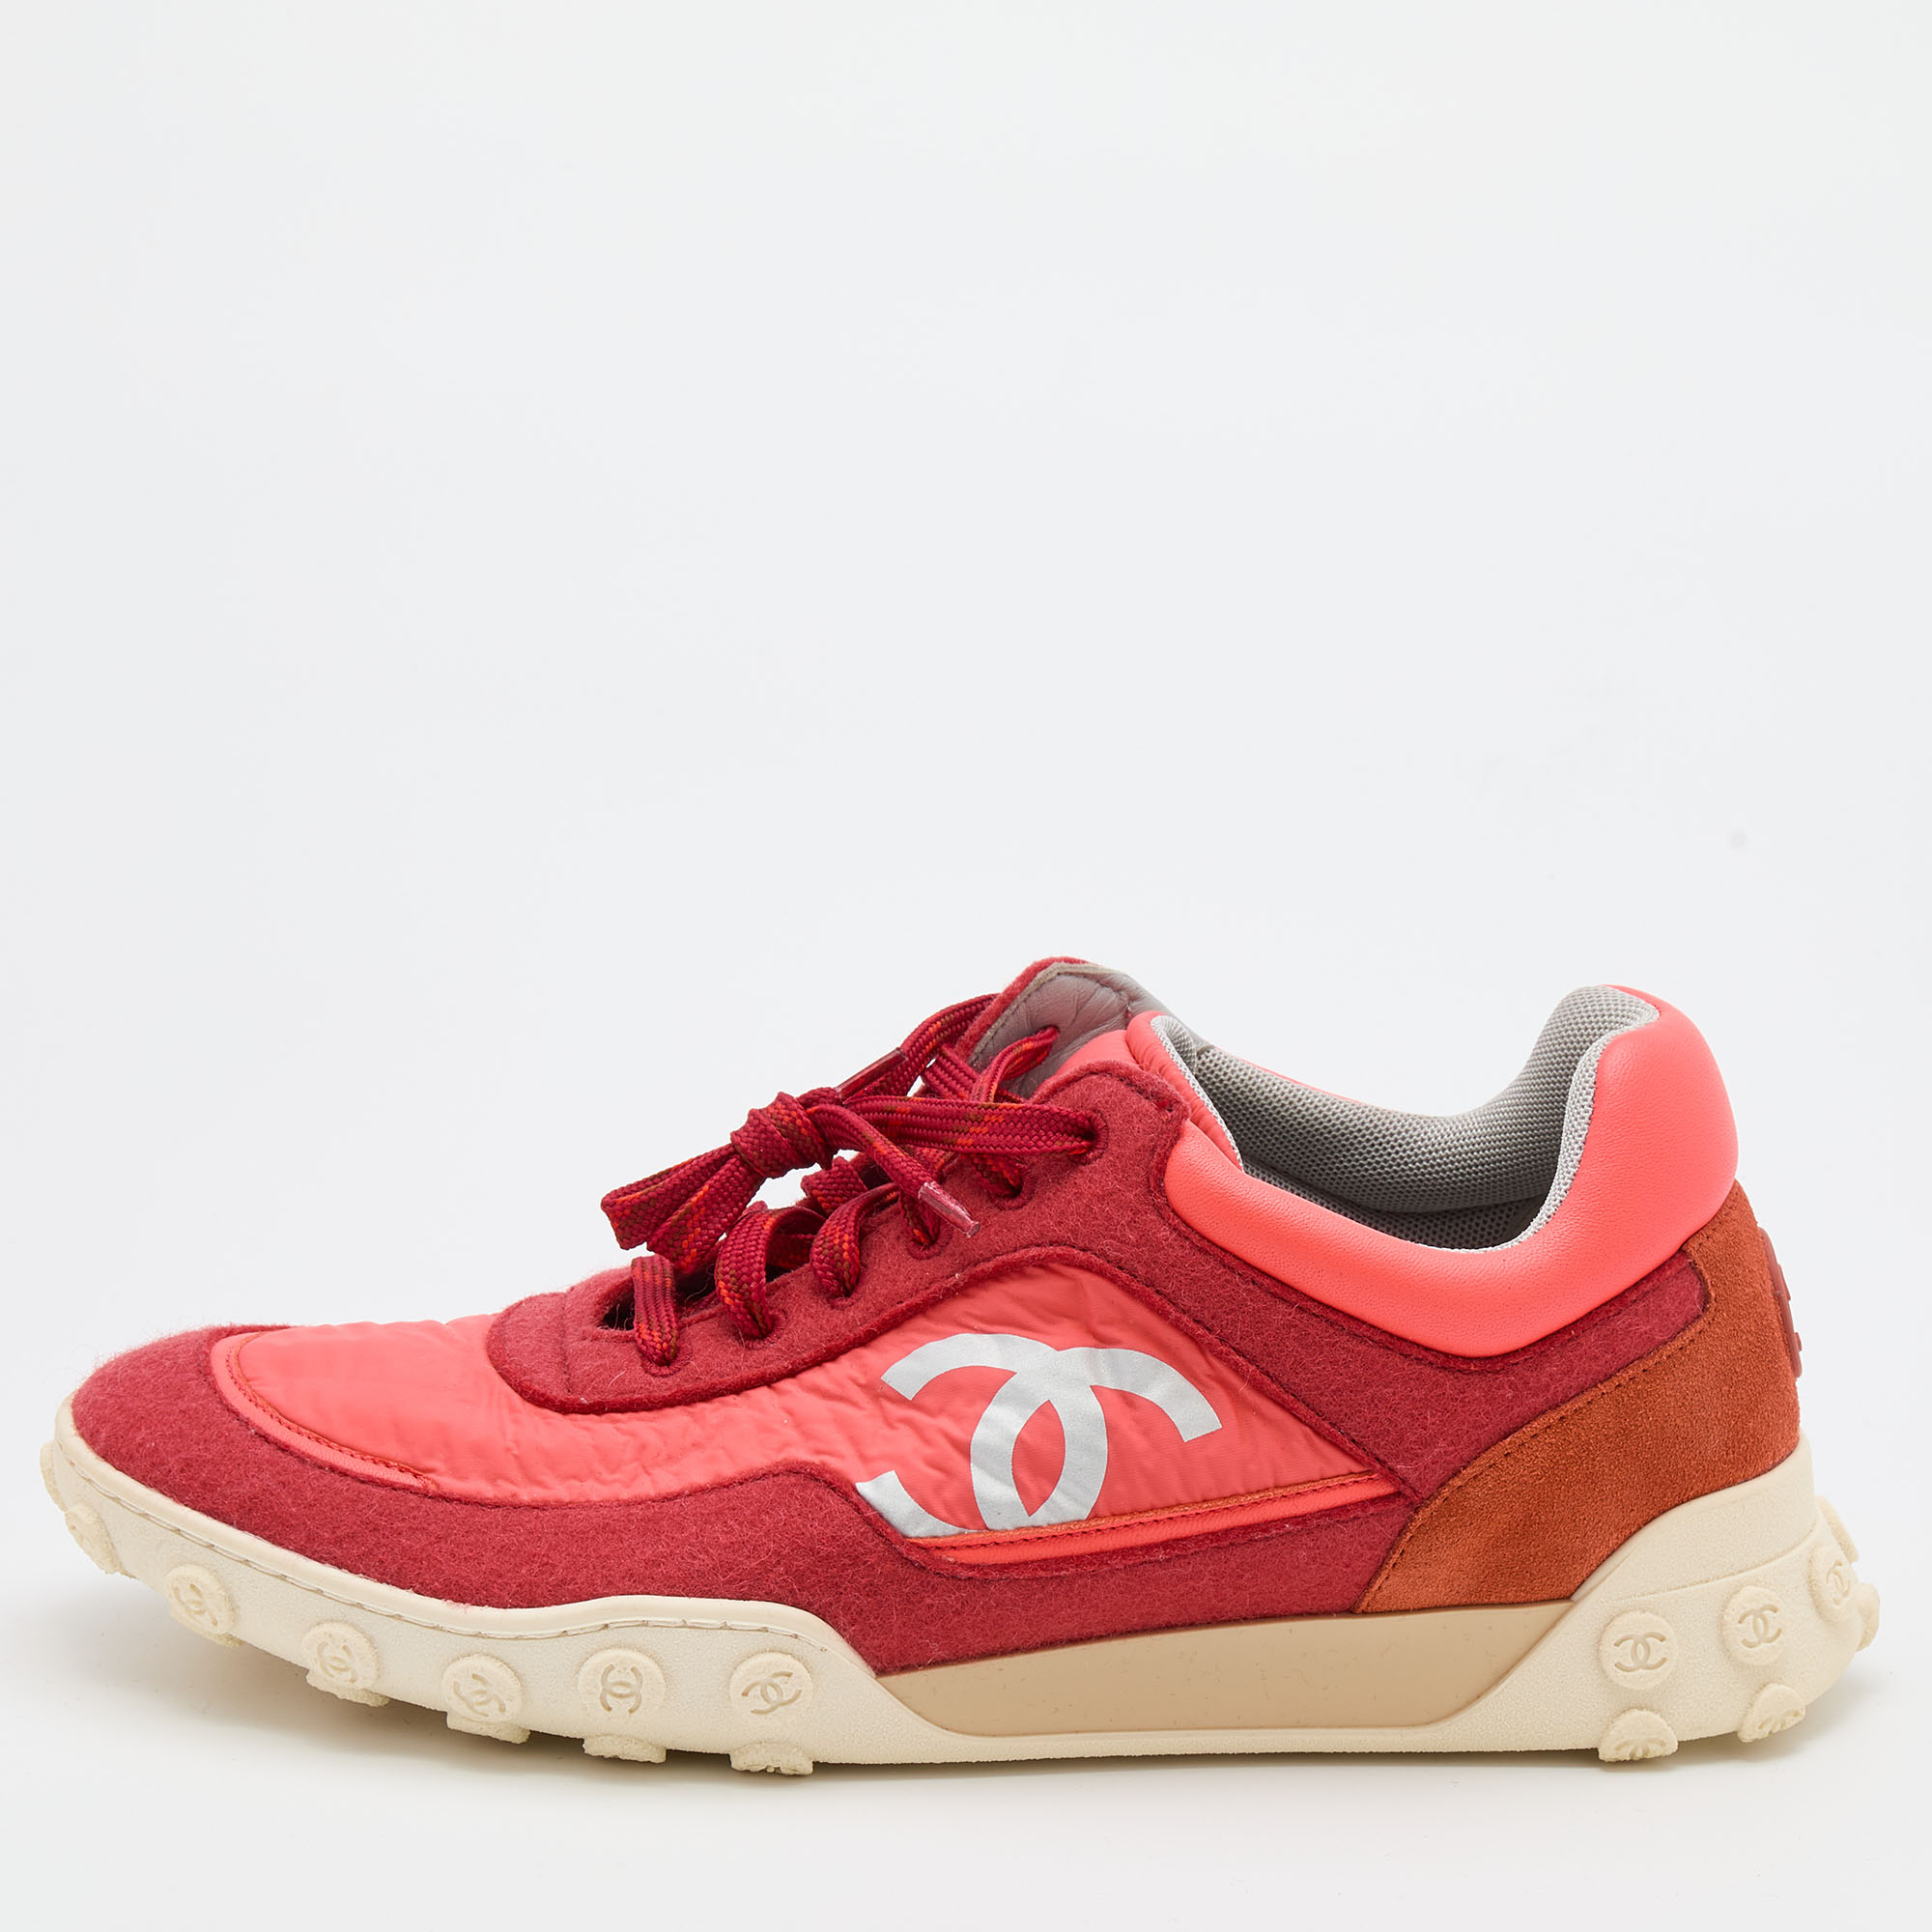 Chanel Nylon Athletic Shoes for Women